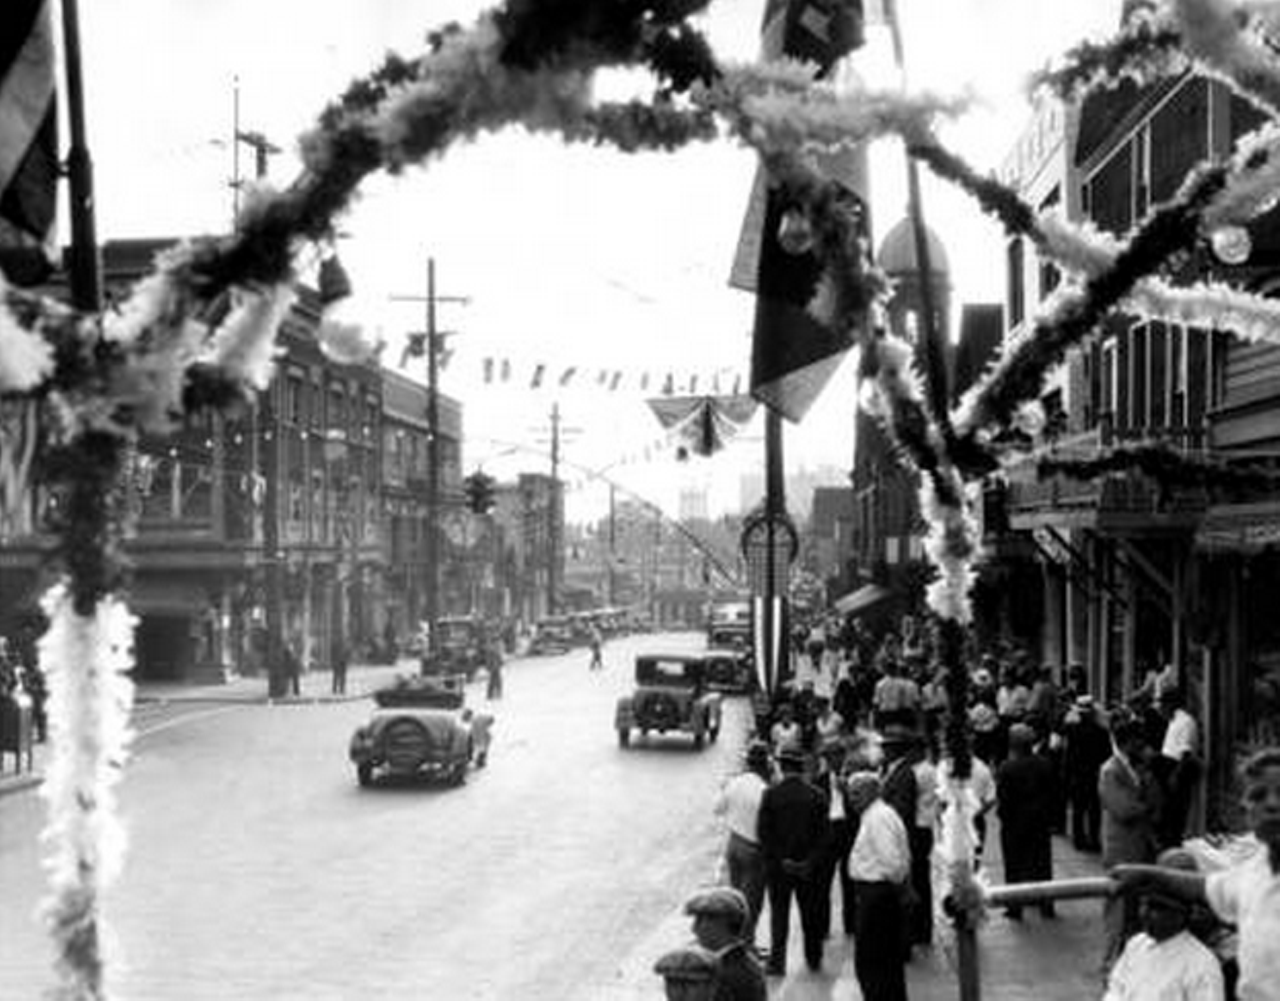 Street decorations along Mayfield, 1930.